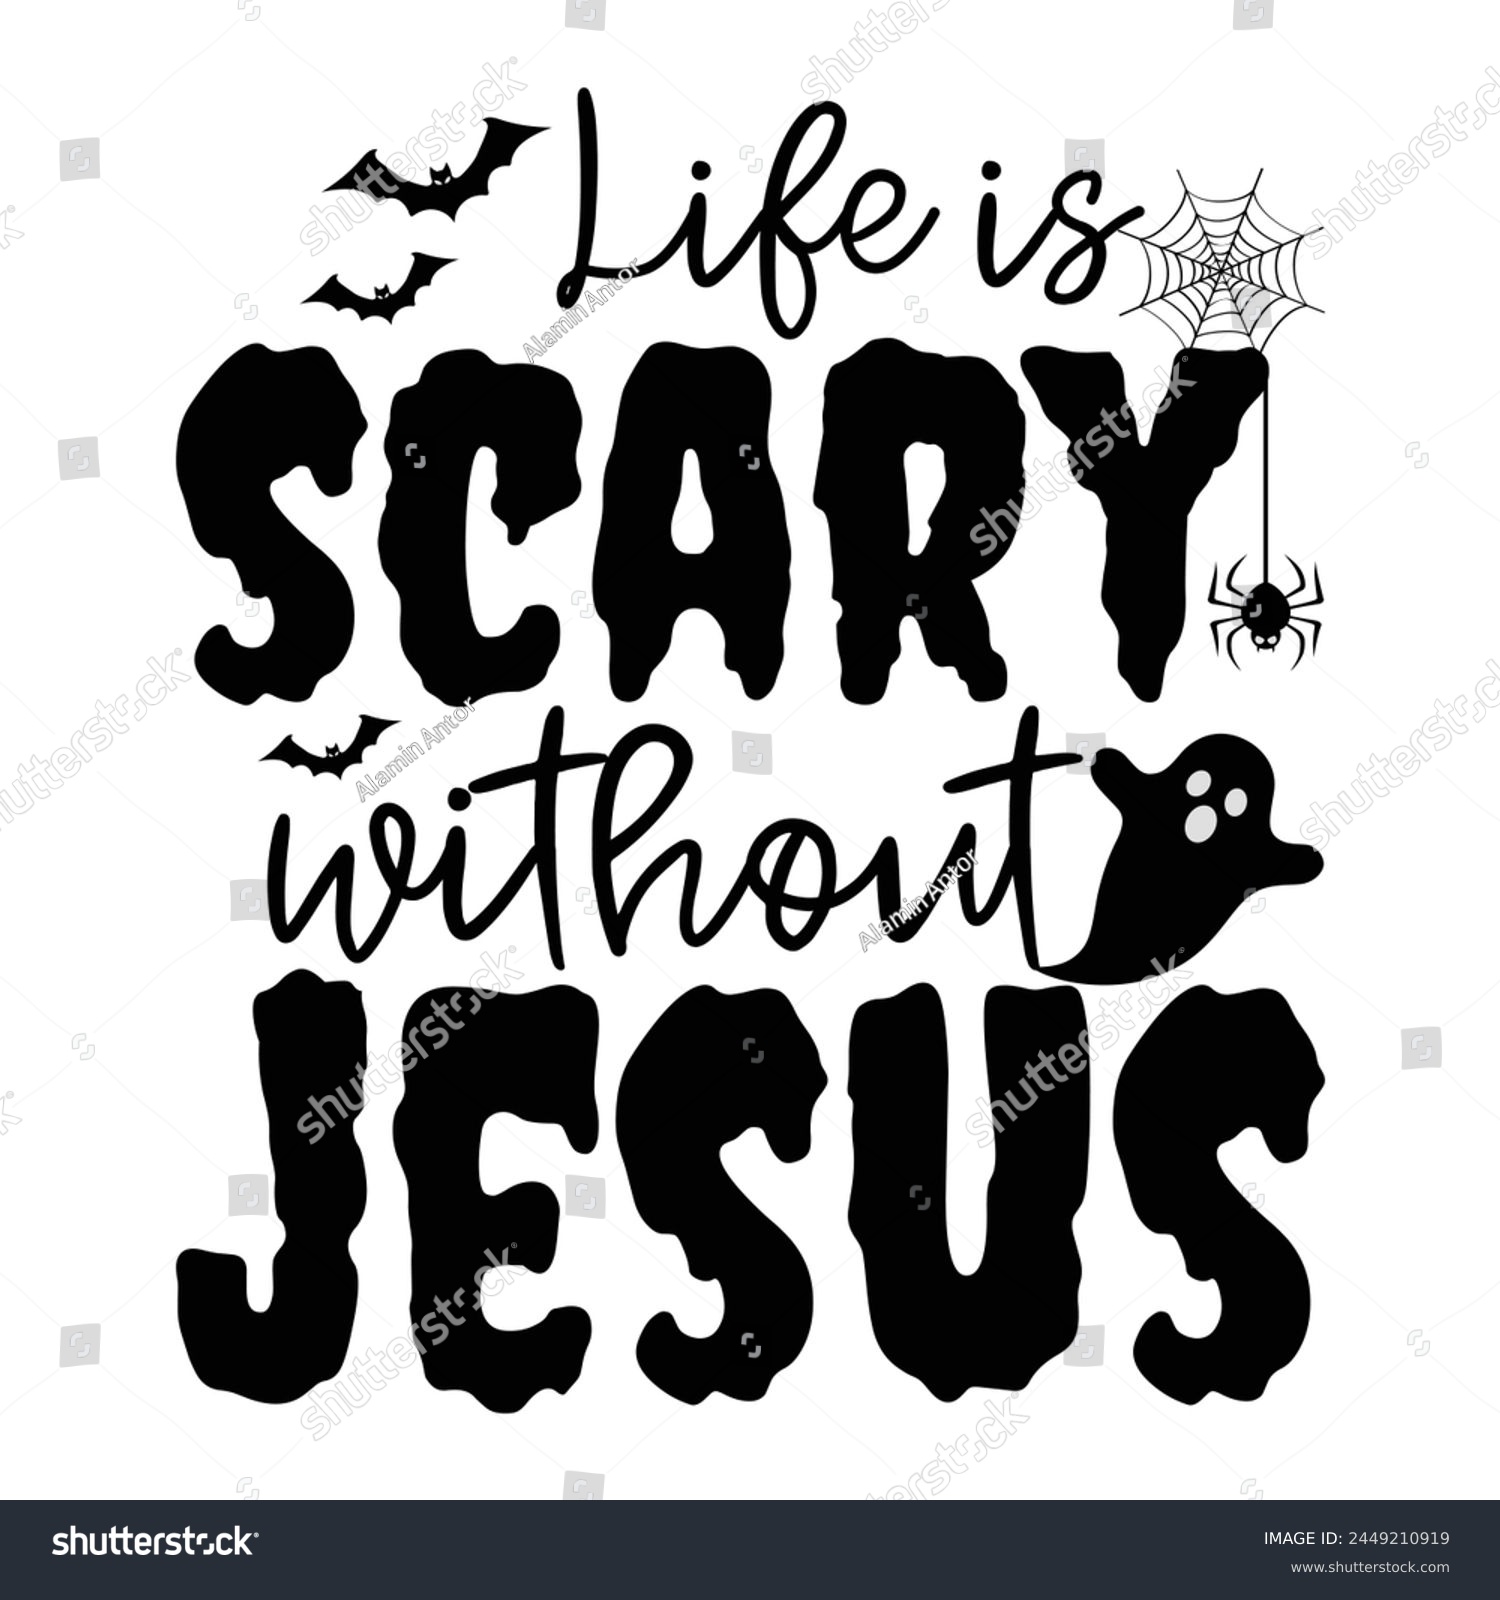 SVG of Life Is Scary Without Jesus T-shirt Design Vector Illustration Clipart svg